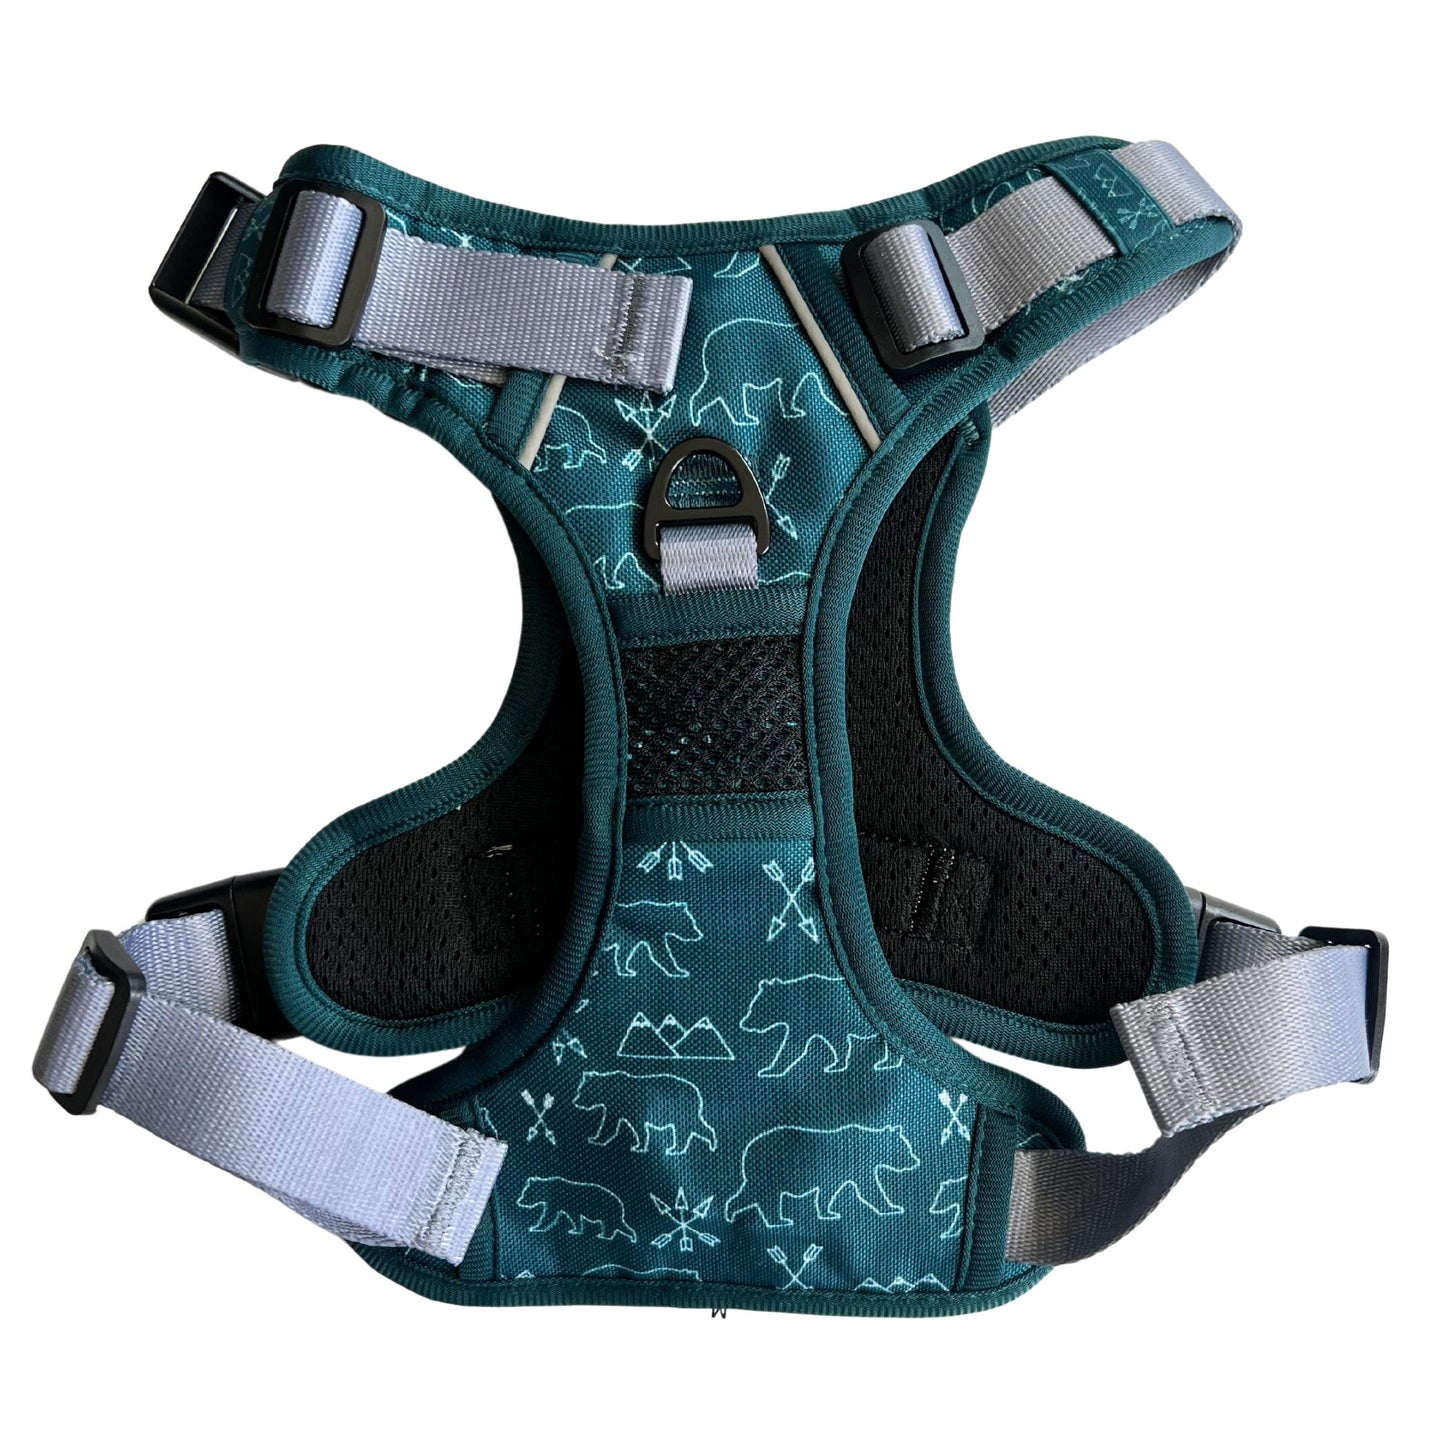 Wildside Dog Gear, how dog harness should fit, how does dog harness go on, how to use dog harness, what dog harness is best to stop pulling, no pull dog harness, no slip over the head harness, dog harness for large dogs, dog harness with handle, durable dog harness, front clip dog harness, ruffwear dog harness, 